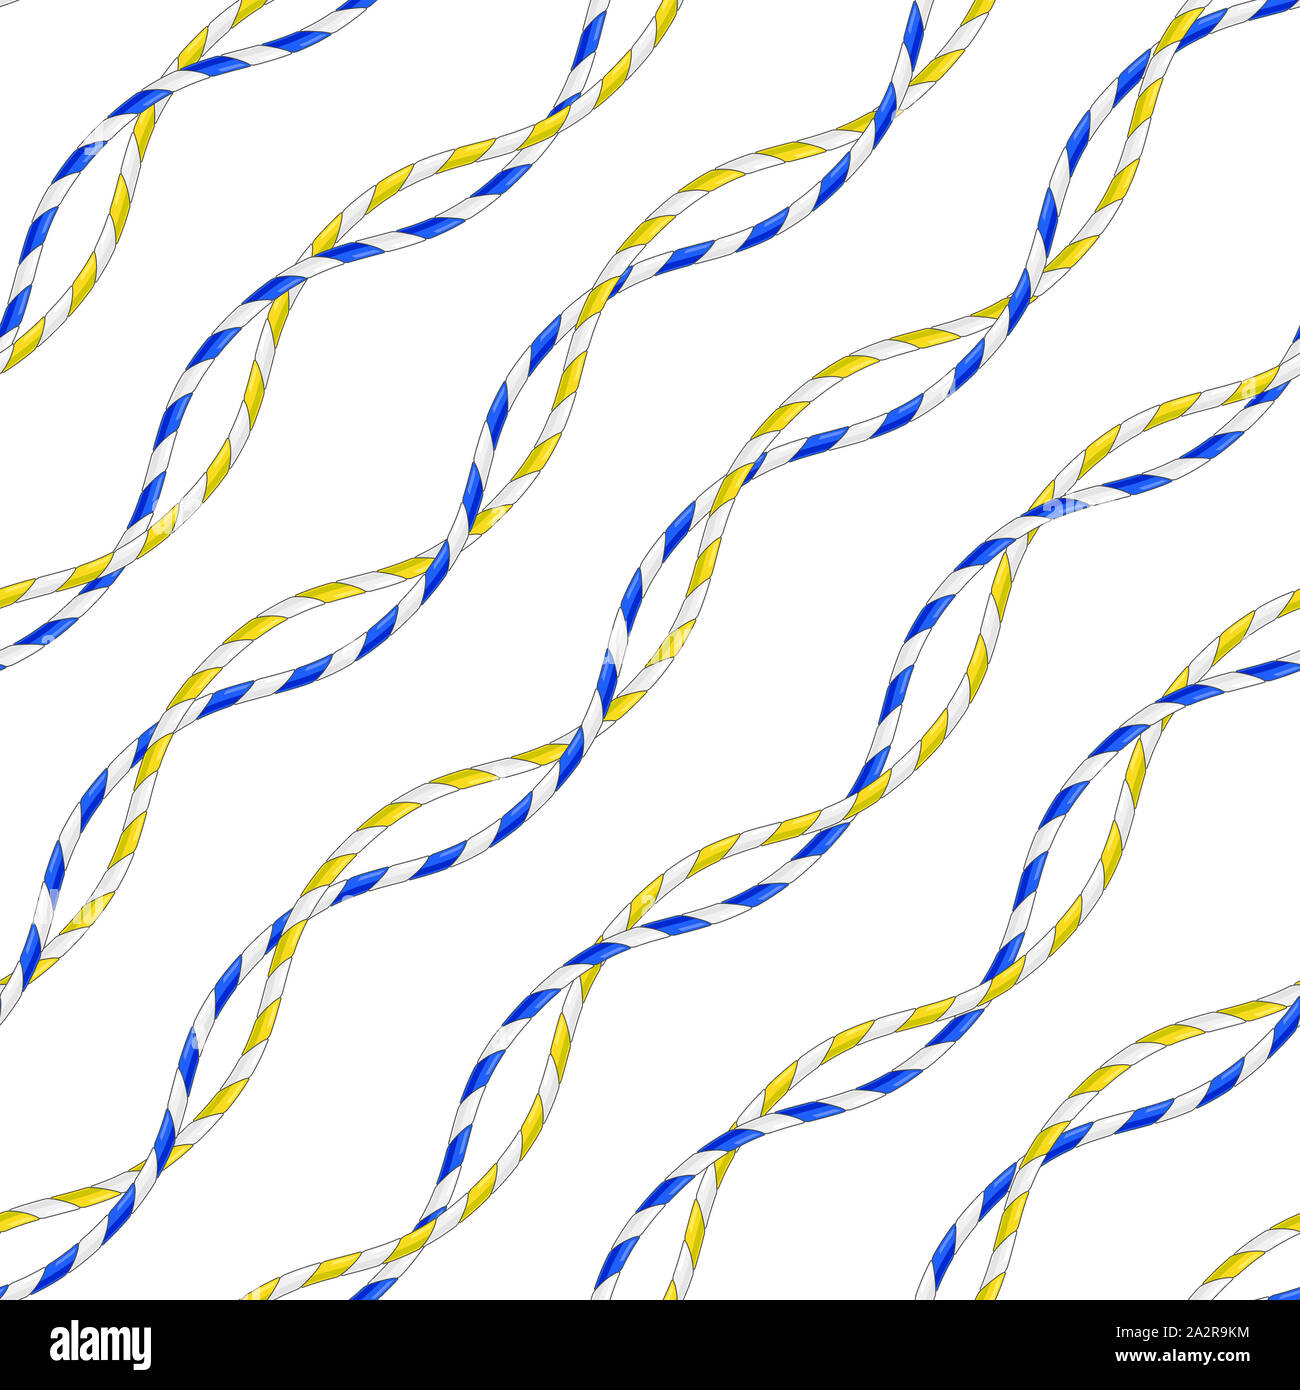 Seamless Colorful Rope Pattern. Repeat Design. Curved Waves, Ropes, DNA. Blue and Yellow. Design for Decor, Fabric, Prints, Textile. on White Backgrou Stock Photo